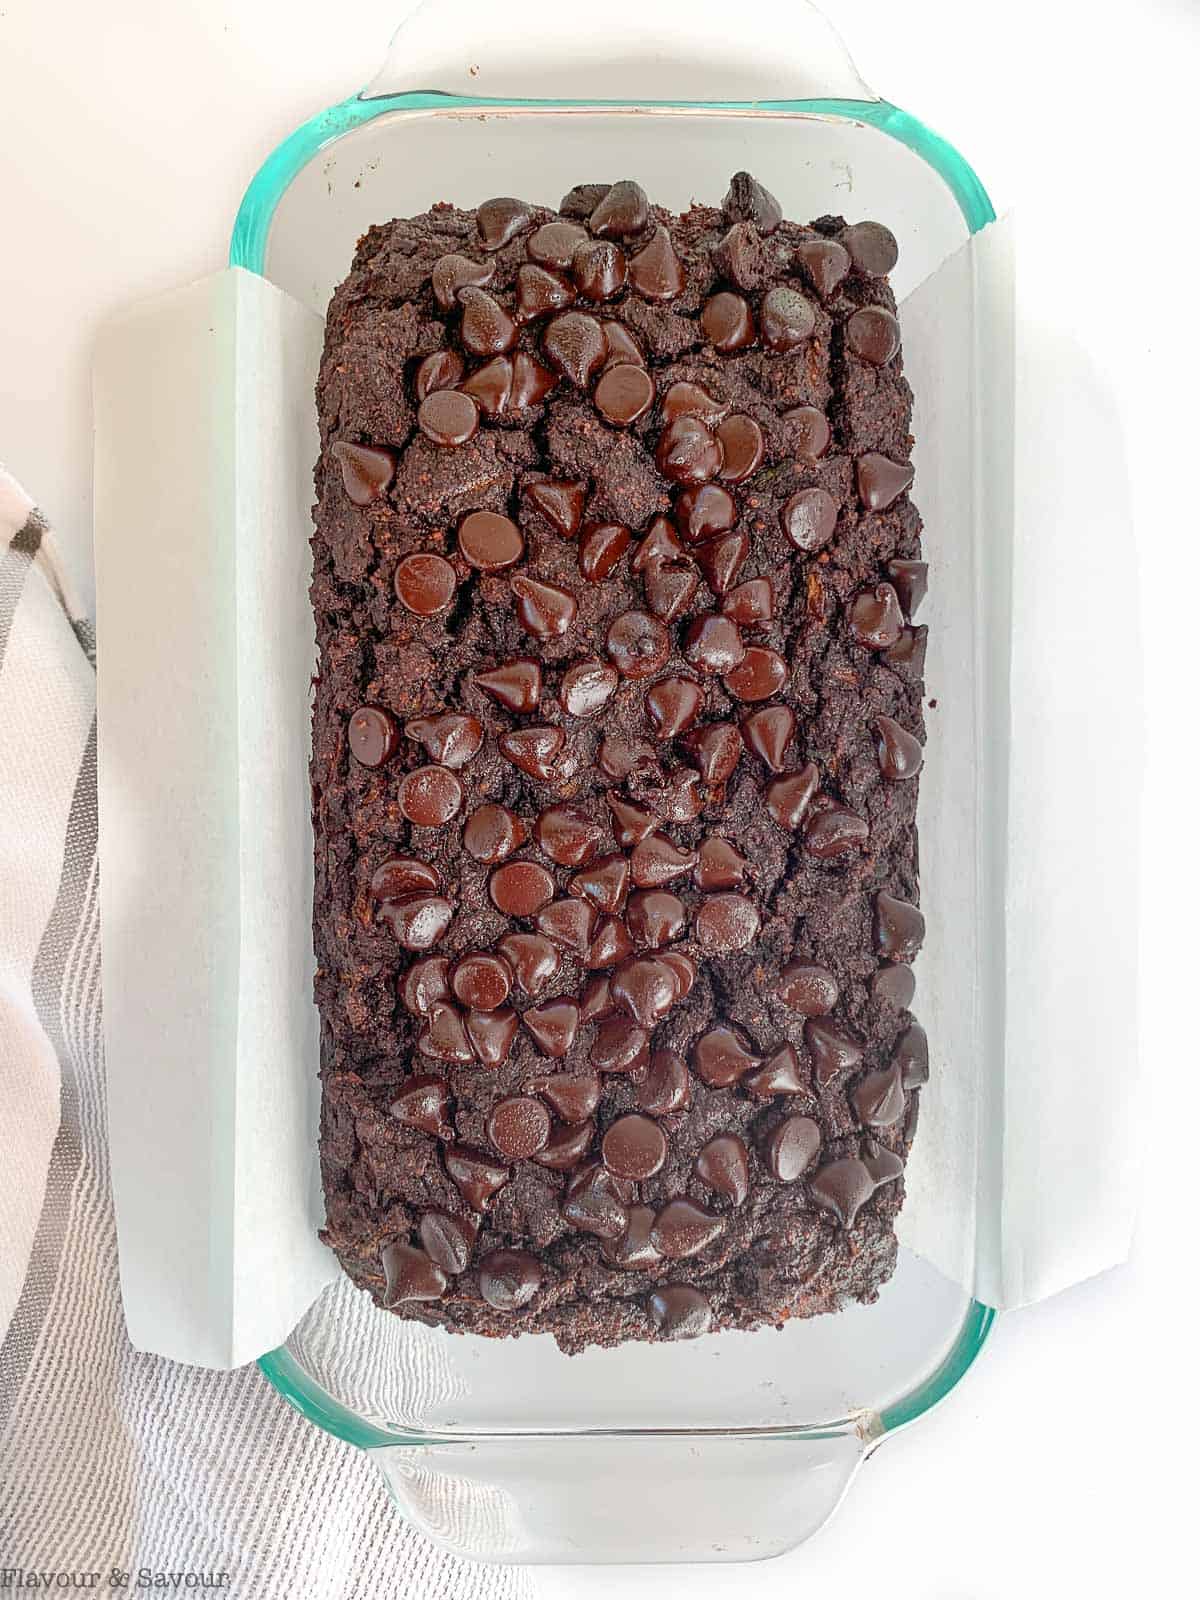 Double chocolate zucchini bread in a lined loaf pan.